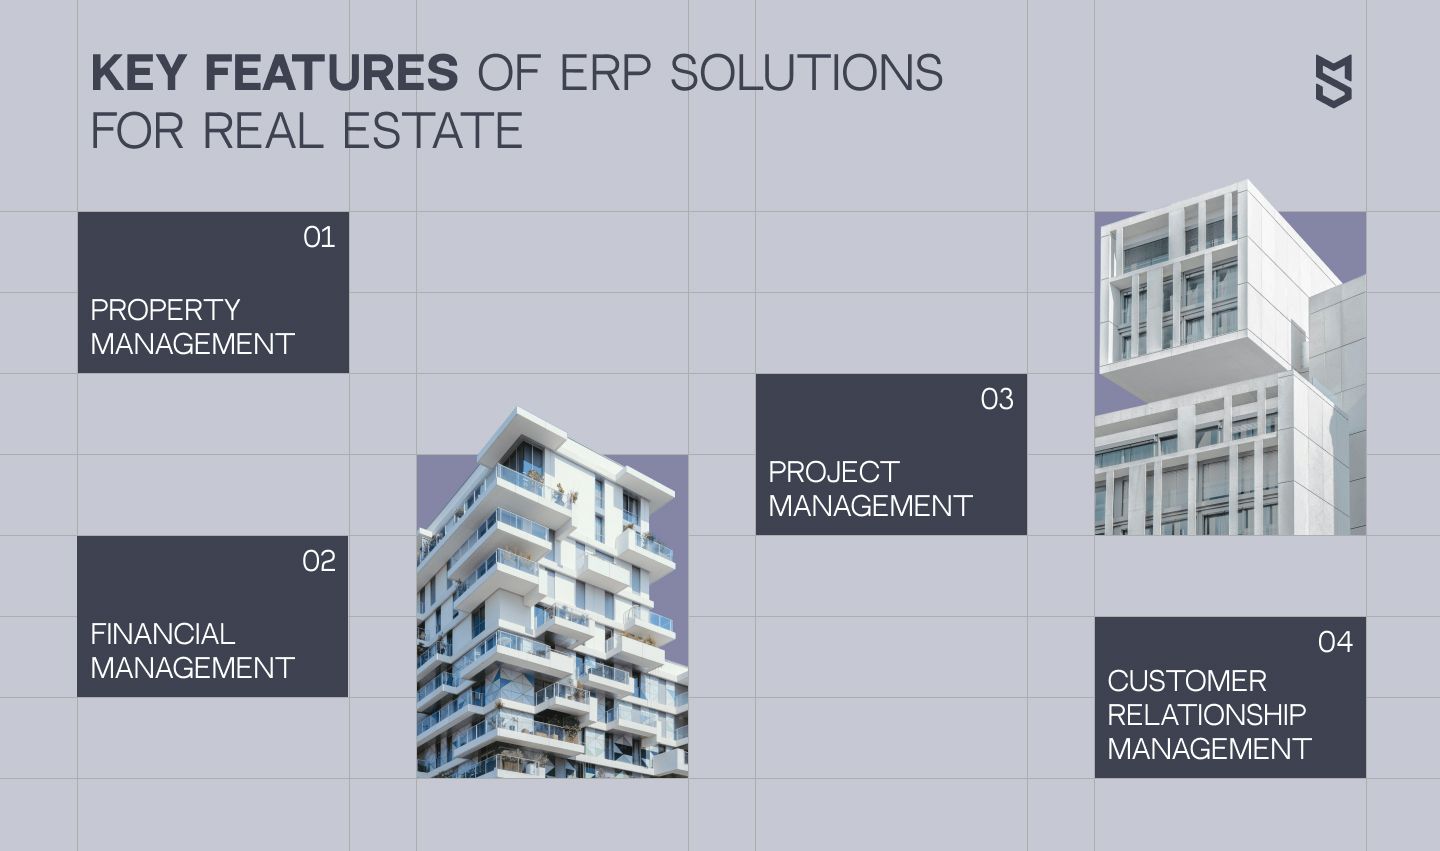 Key features of ERP solutions for real estate